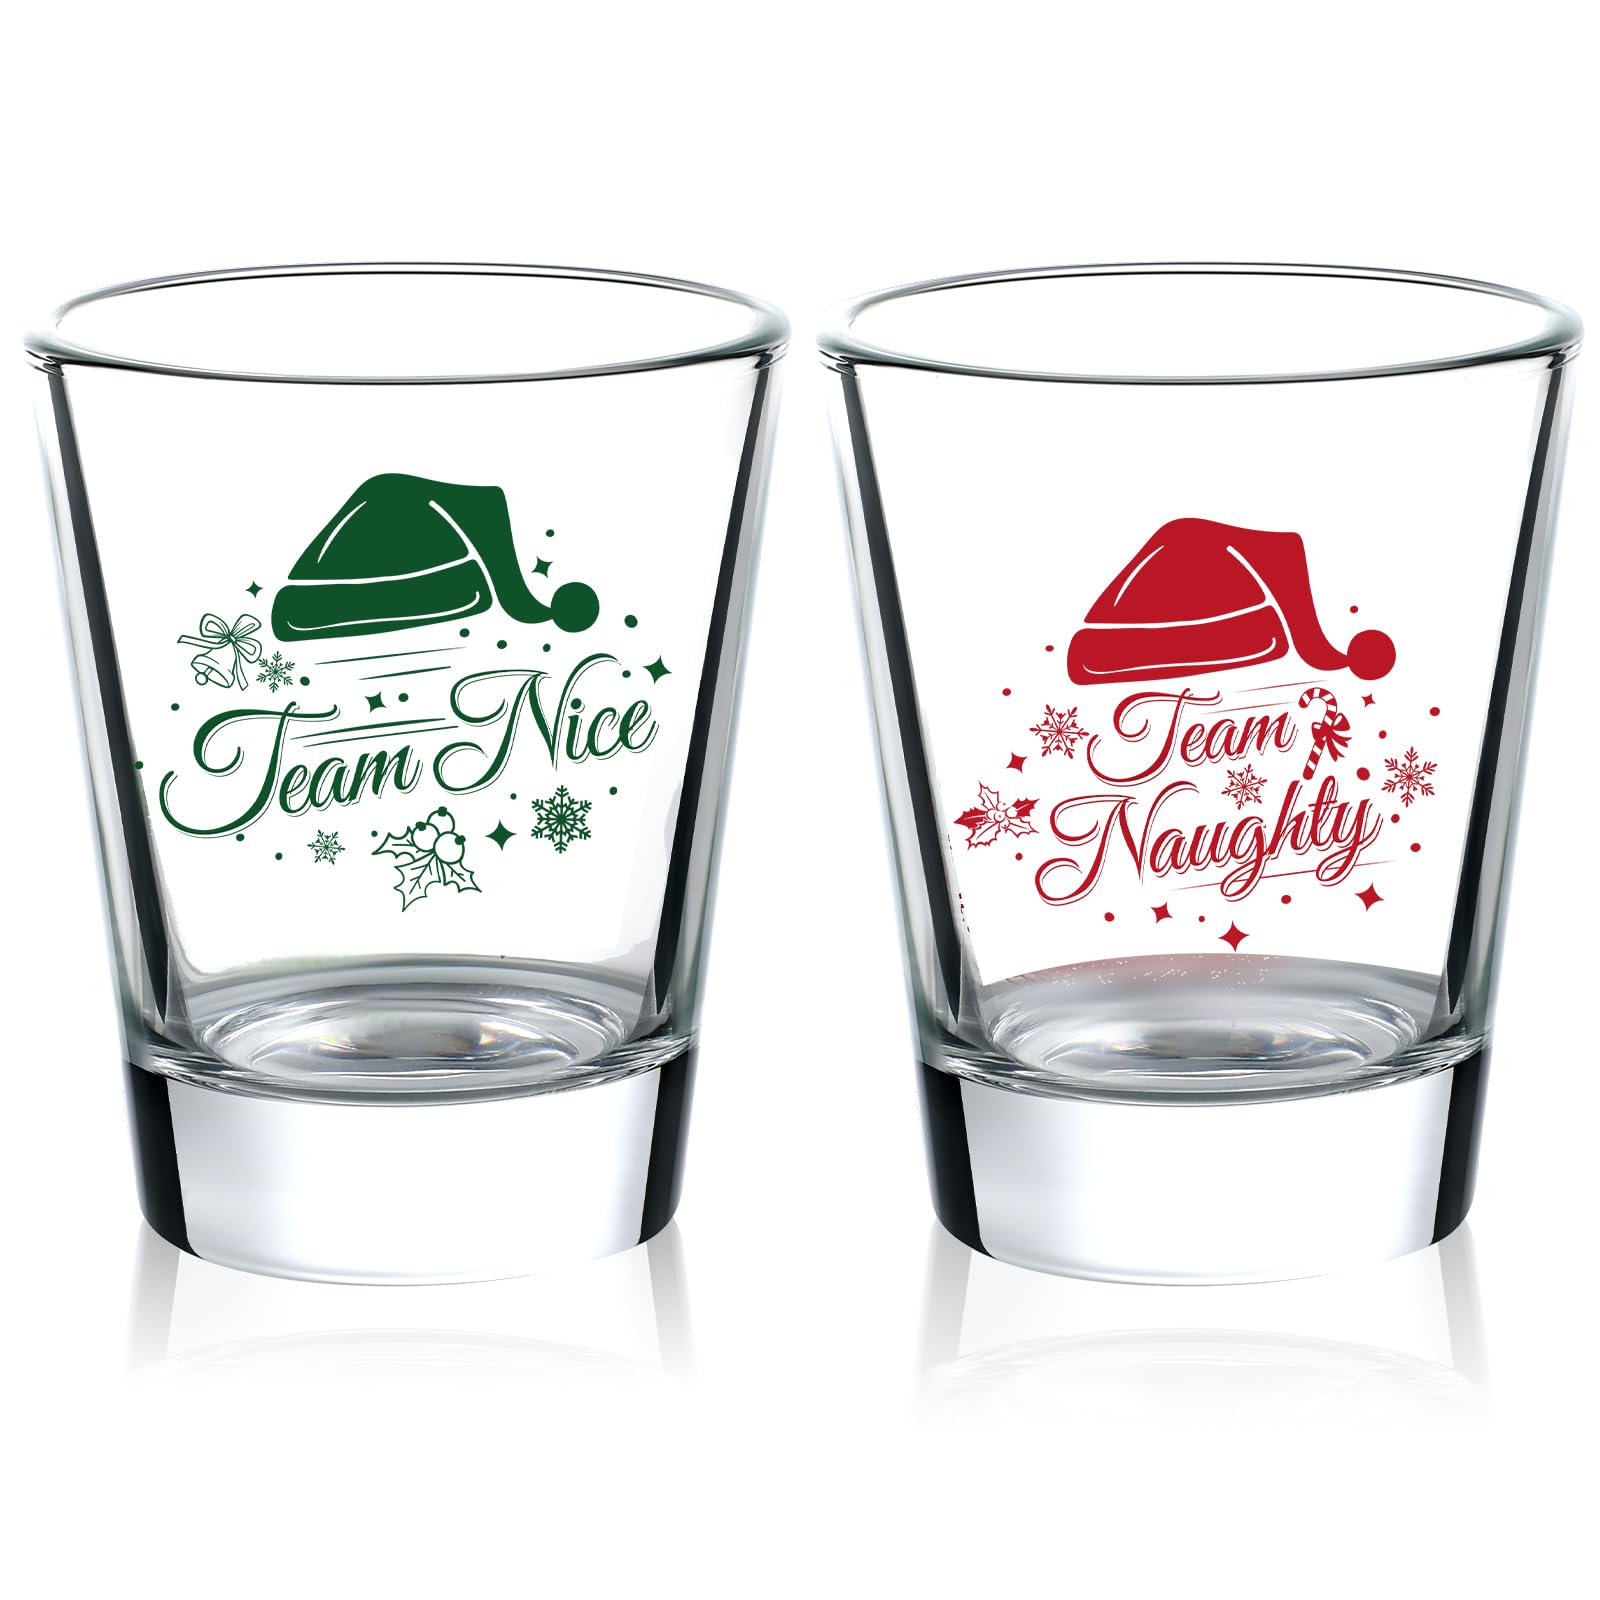 2 Pcs Shot Glasses Christmas Team Naughty and Team Nice Novelty Glass 2 oz Xmas Liquor Glass Green Red Christmas Hat Funny Heavy Glass for Holiday Celebrating Wedding Party Game Gift Supplies